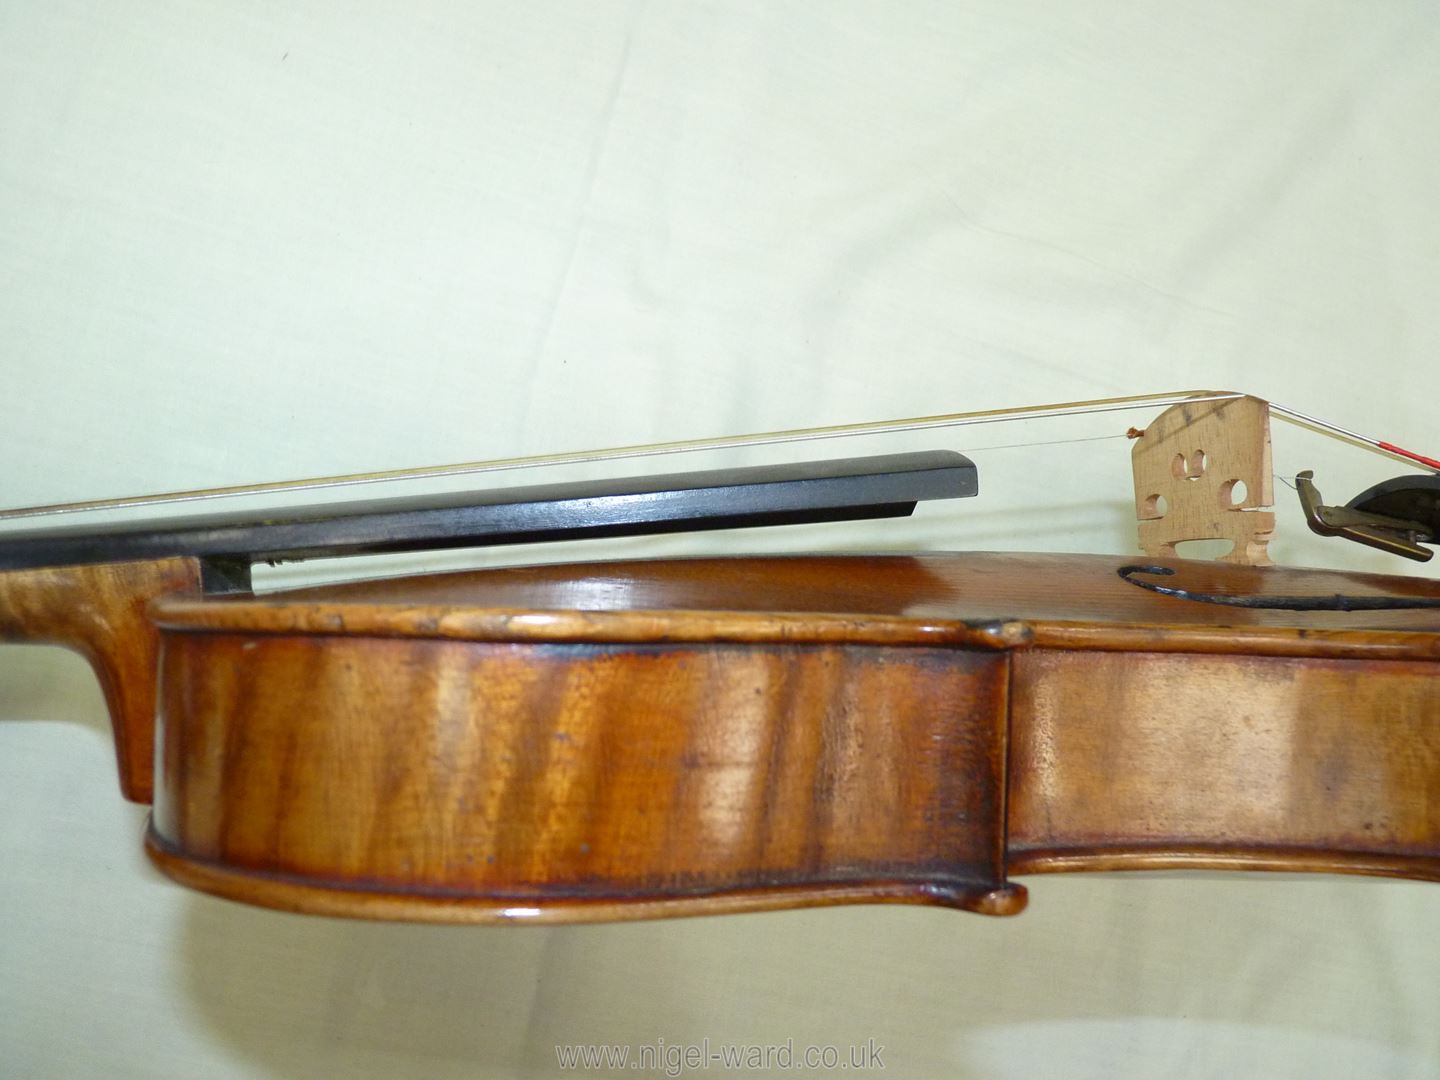 An antique violin having a well-carved scroll and nicely figured body including the back, - Image 20 of 49